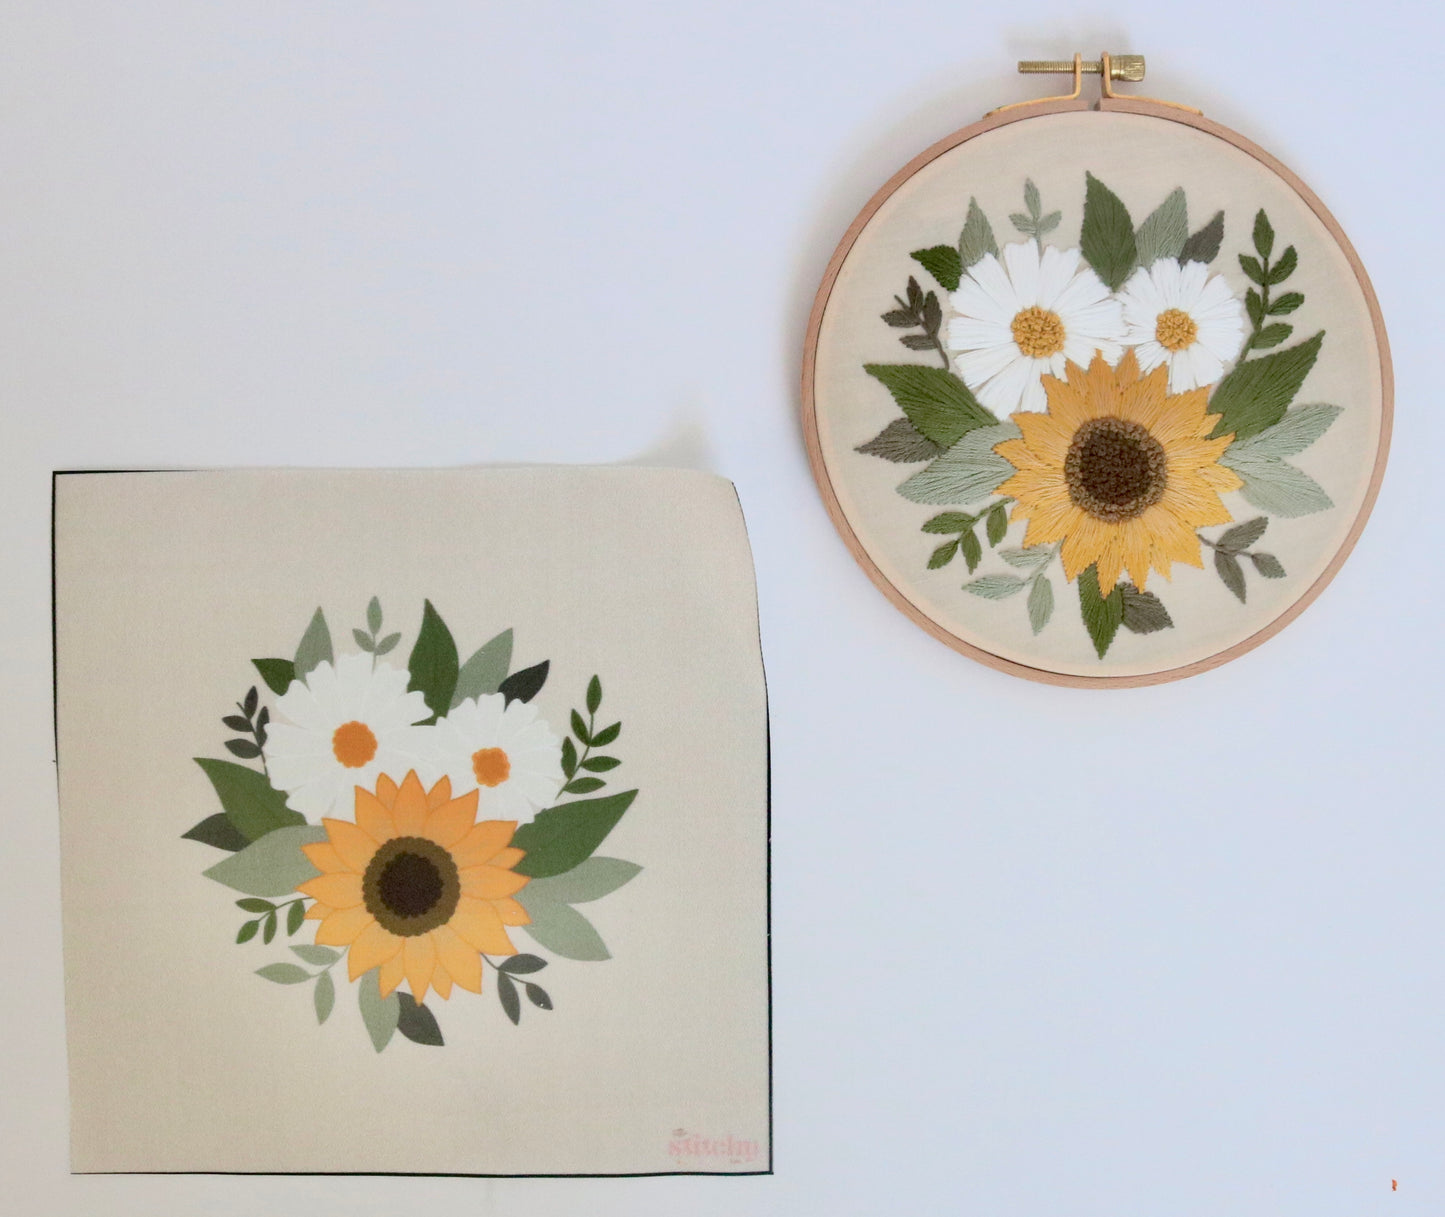 6" Sunflower and Daisies Embroidery Kit - Confident Beginner